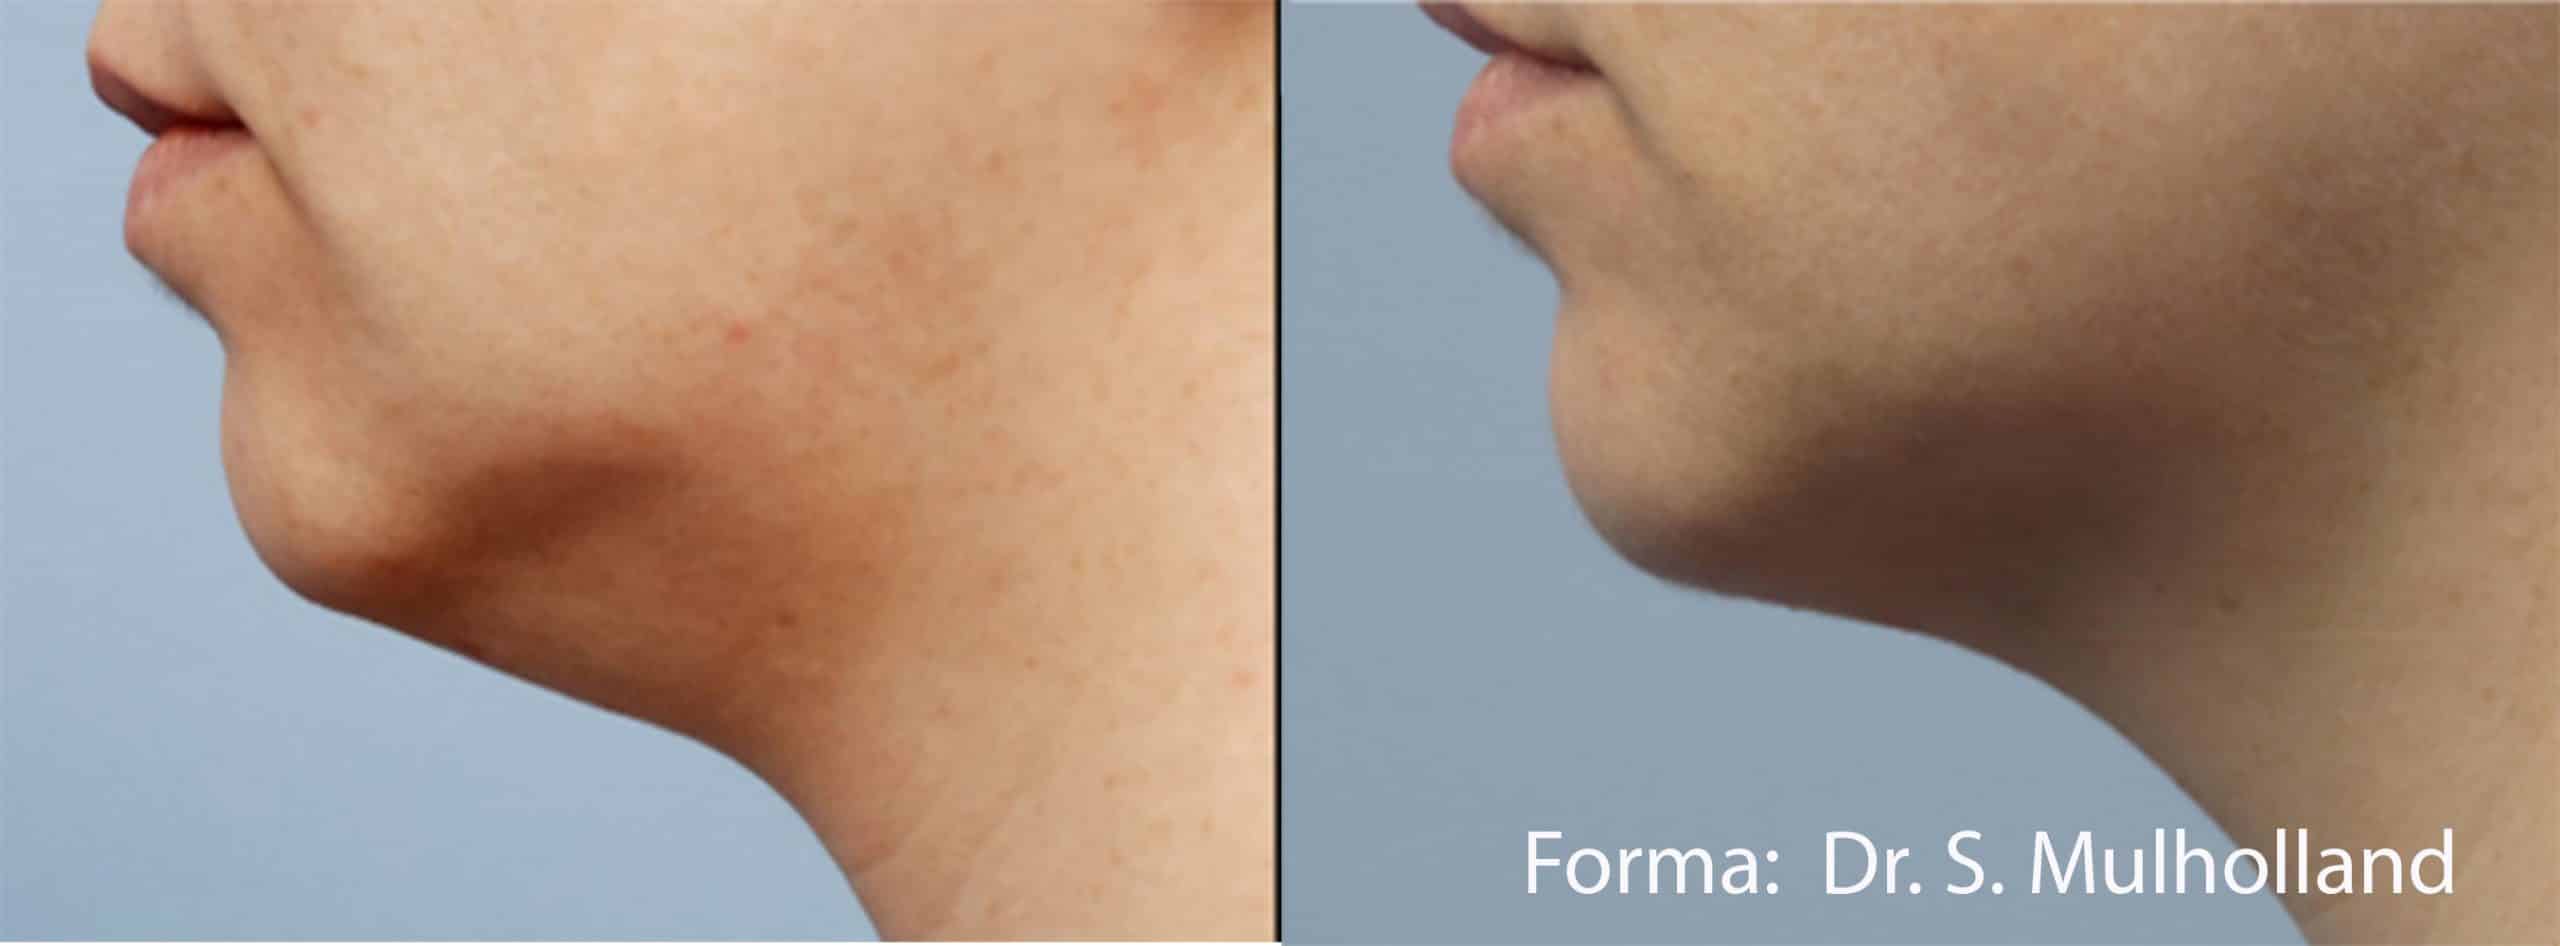 forma-before-after-dr-s-mulholland-preview-3